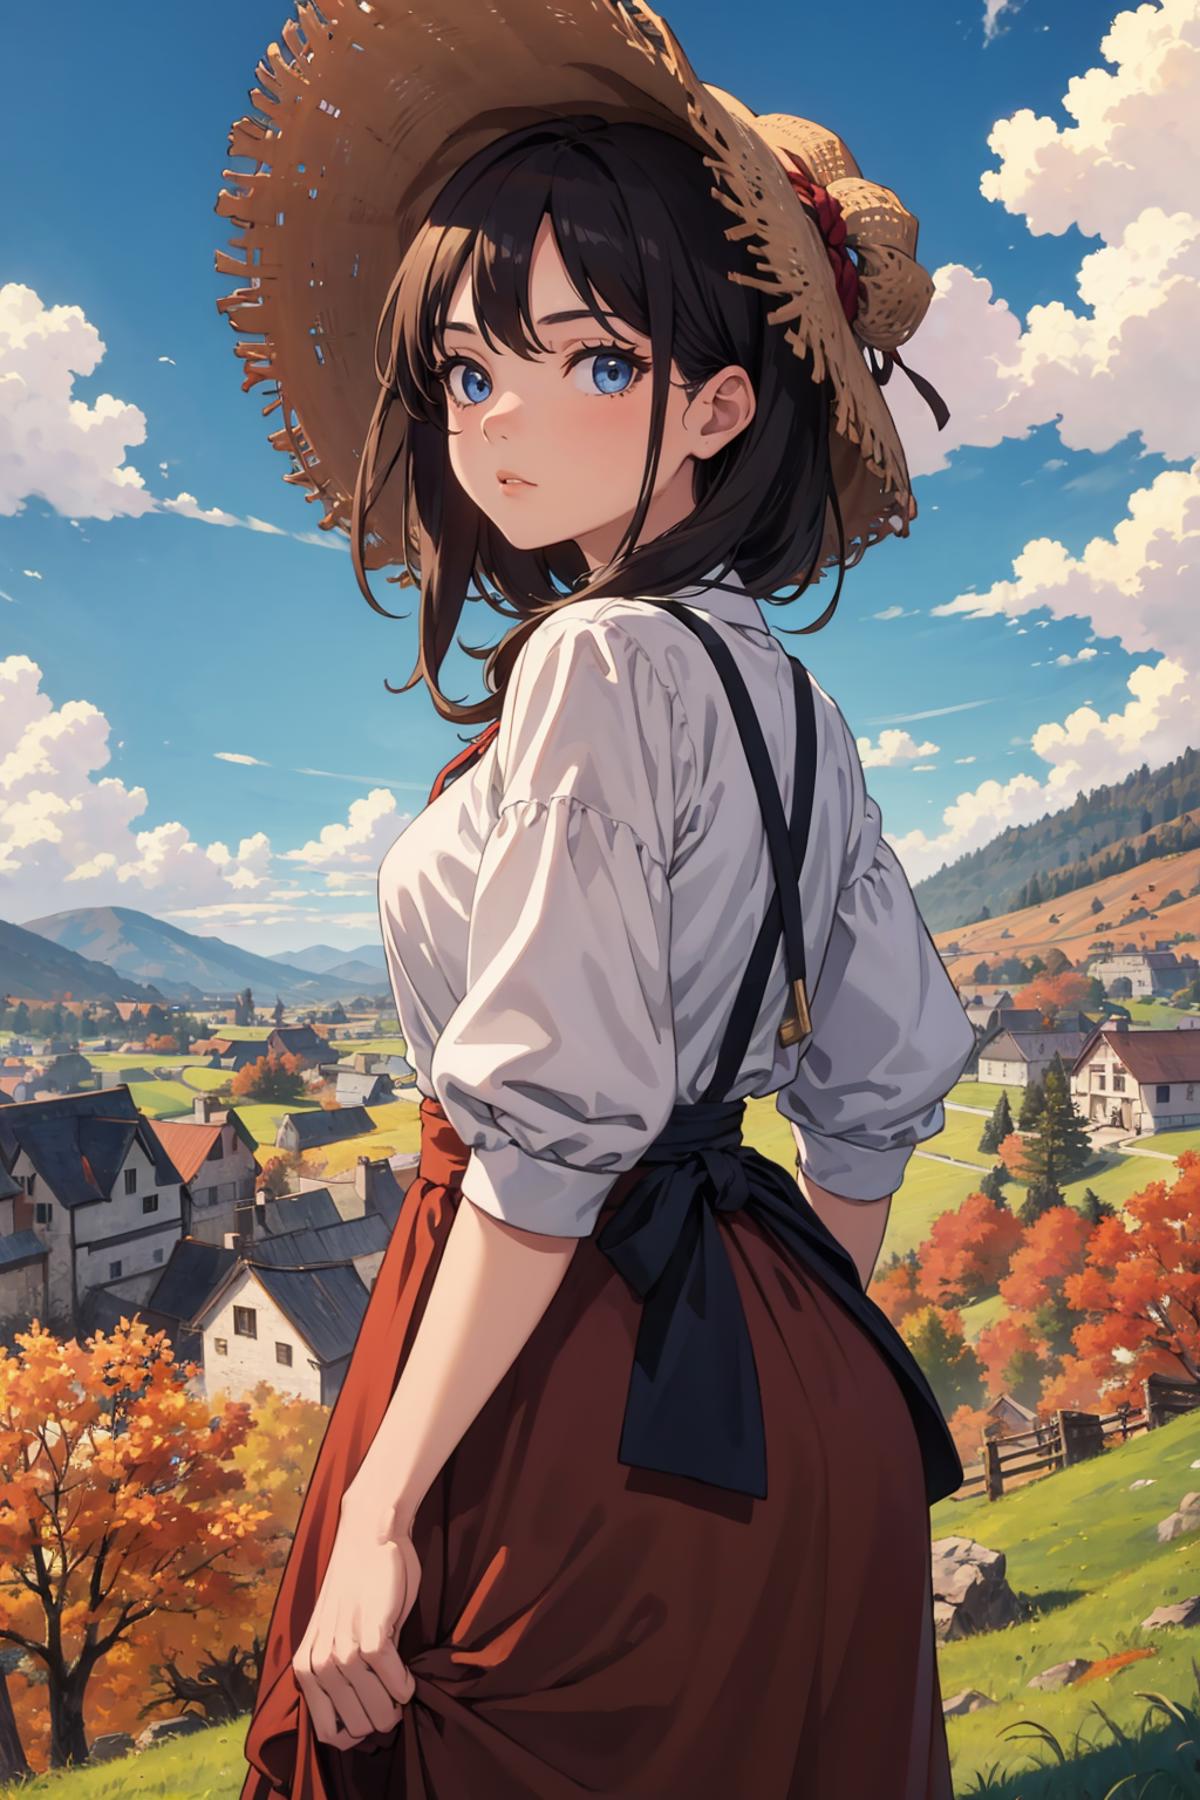 A girl wearing a hat and an apron, standing in front of a town.